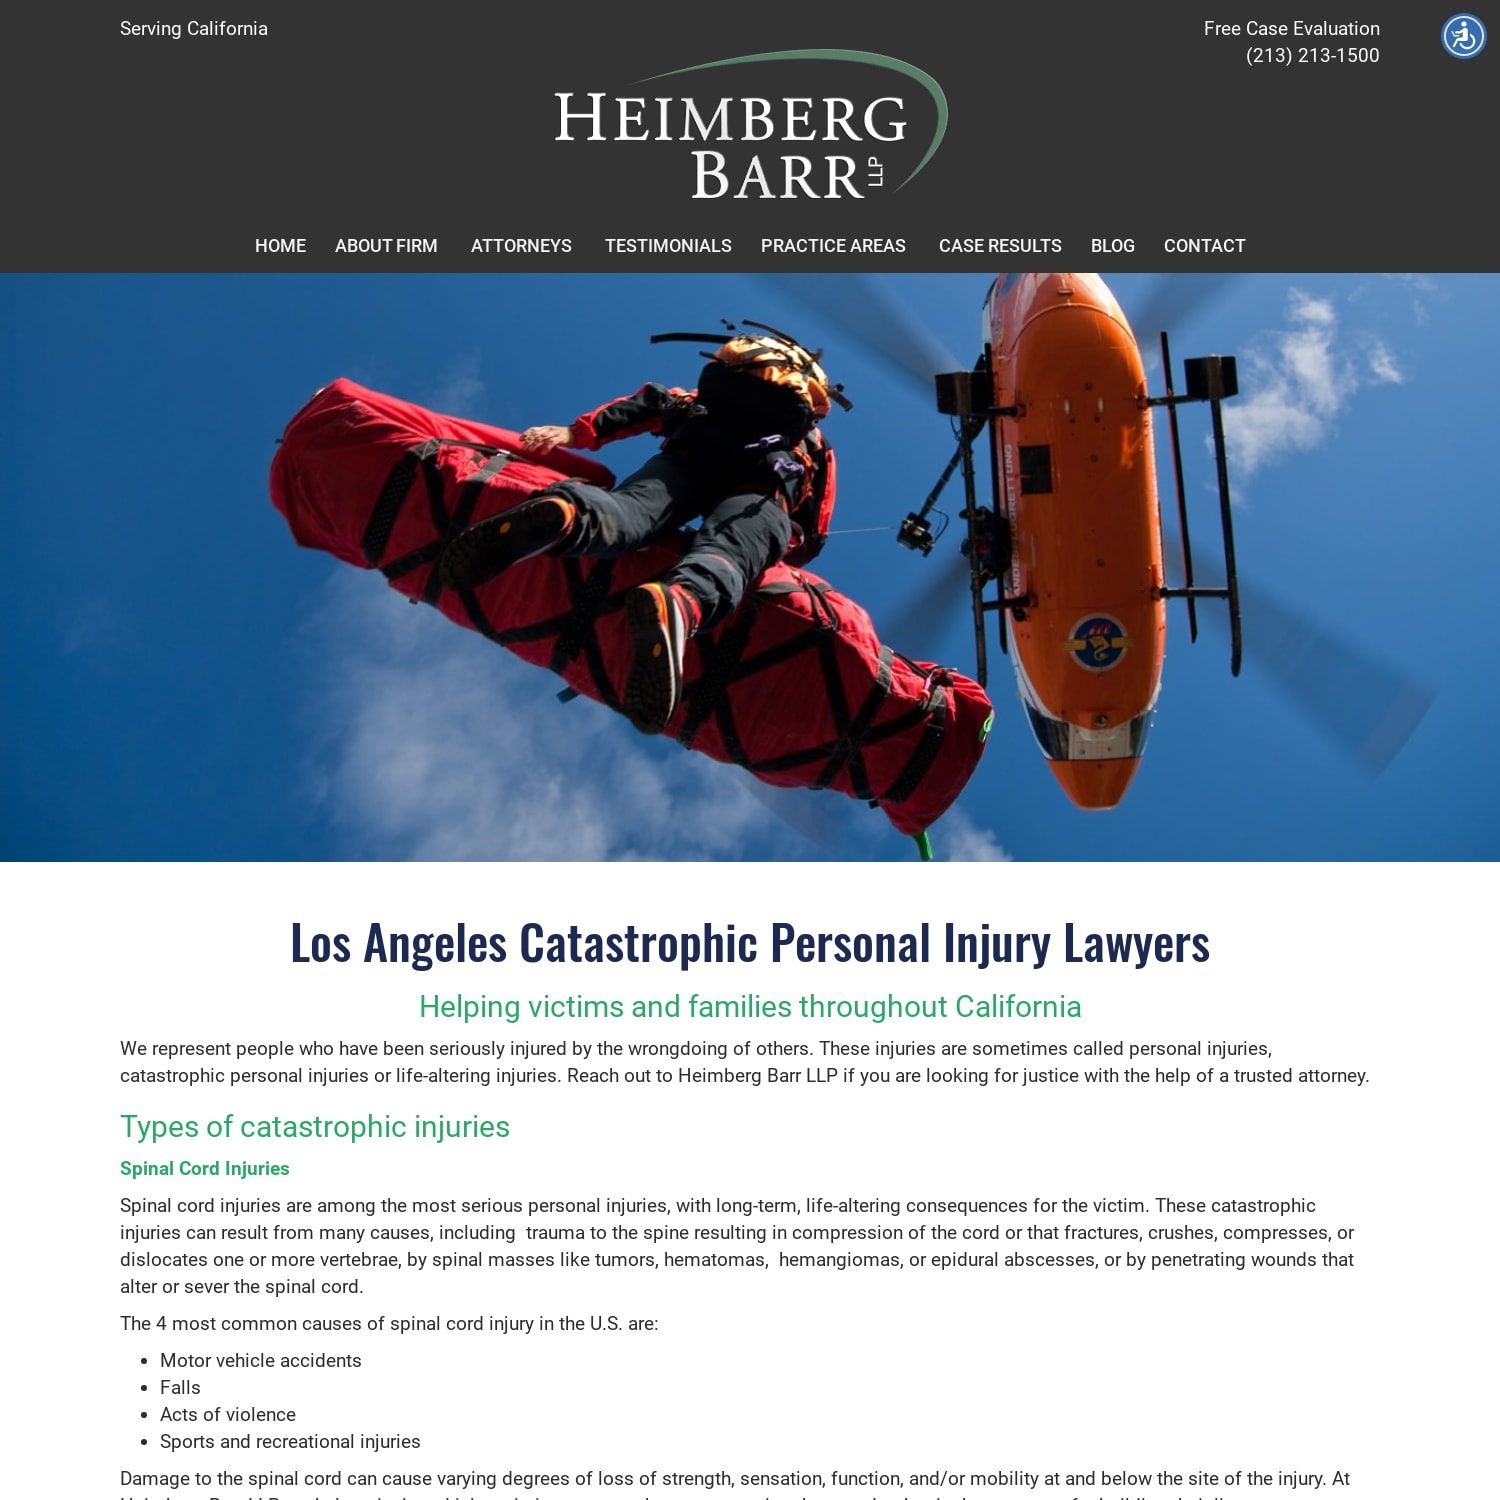 Los Angeles California Catastrophic Personal Injury Lawyers